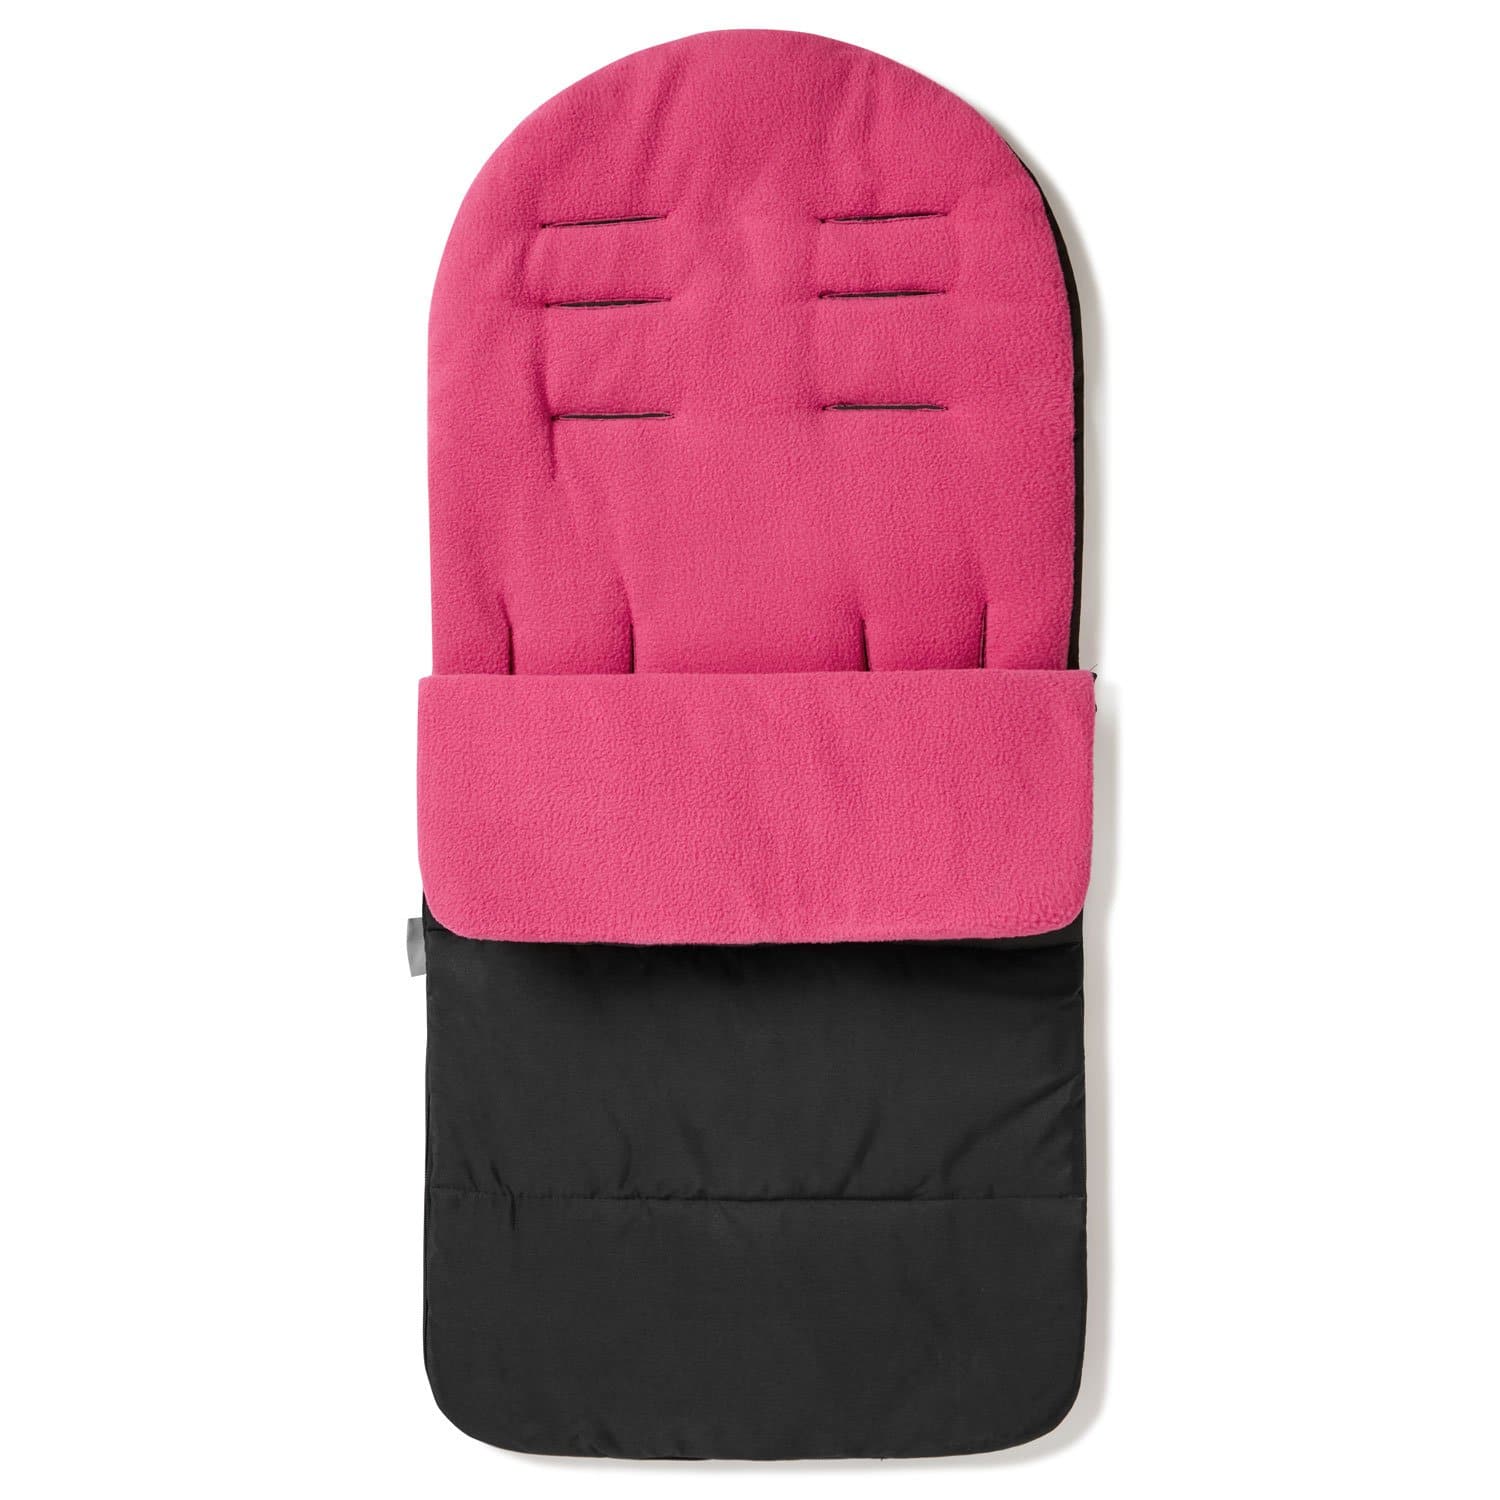 Premium Footmuff / Cosy Toes Compatible with Gesslein - Pink Rose / Fits All Models | For Your Little One